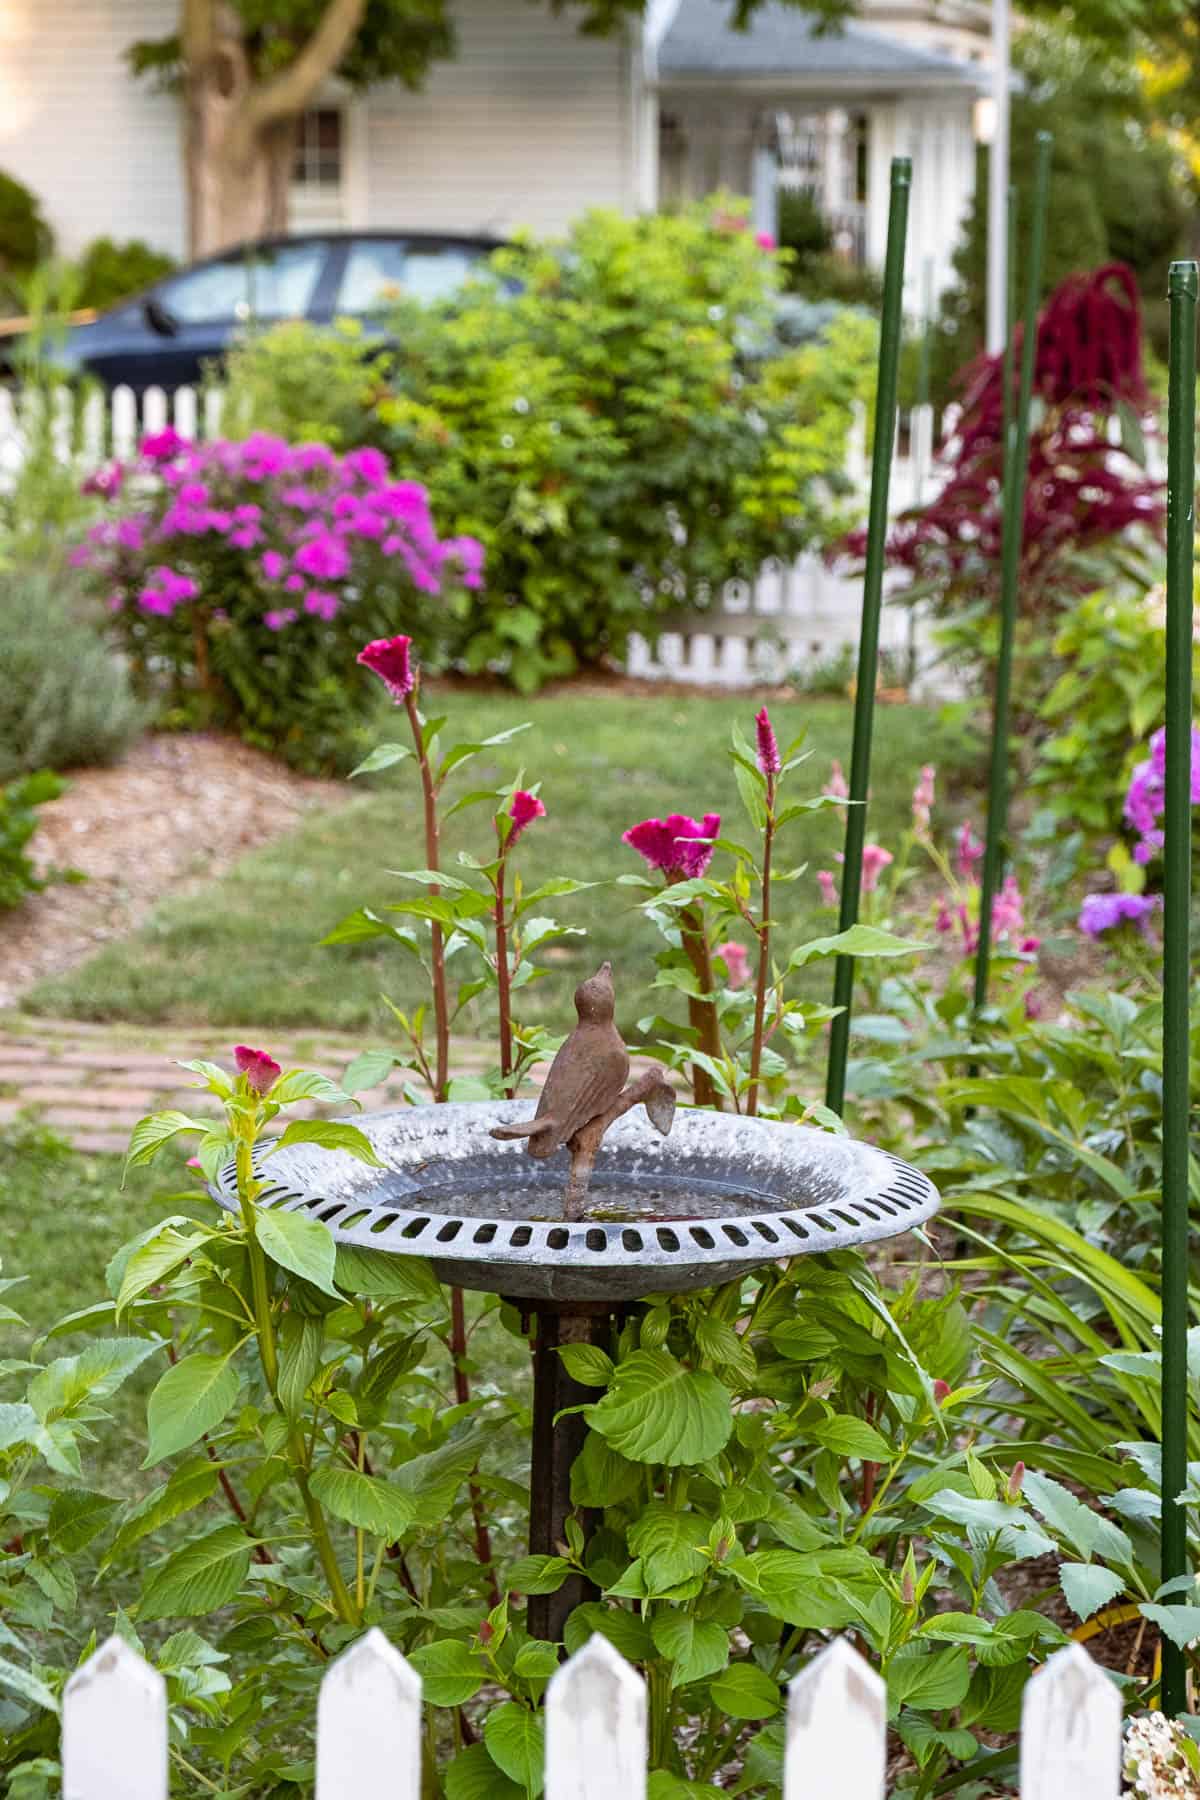 Birdbath in a thicket of hot pink cockscomb behind a white picket fence.